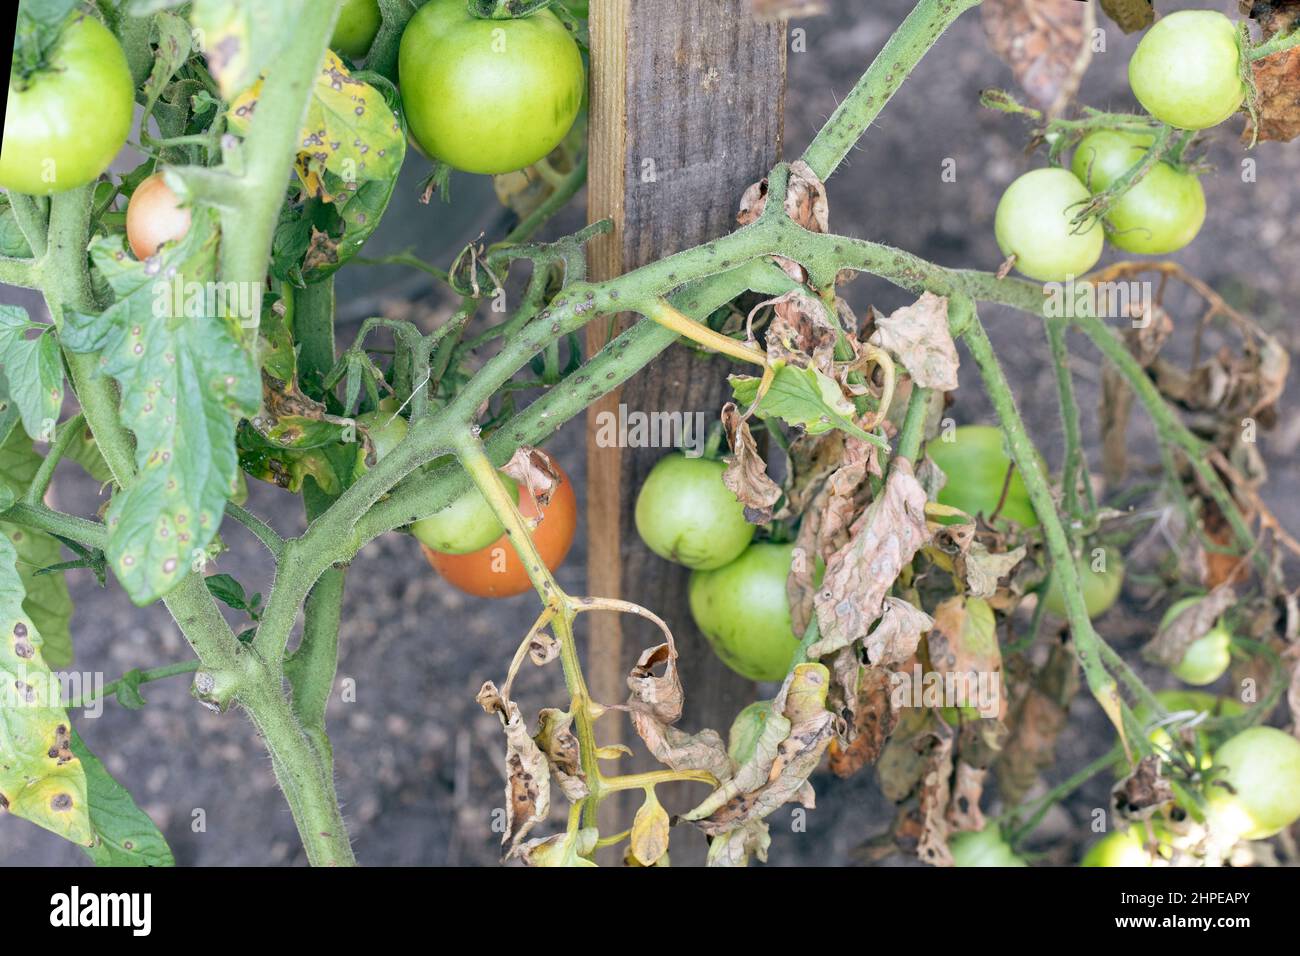 Fusarium wilt disease on tomato plant. Damaged by disease and pests of tomato leaves Stock Photo